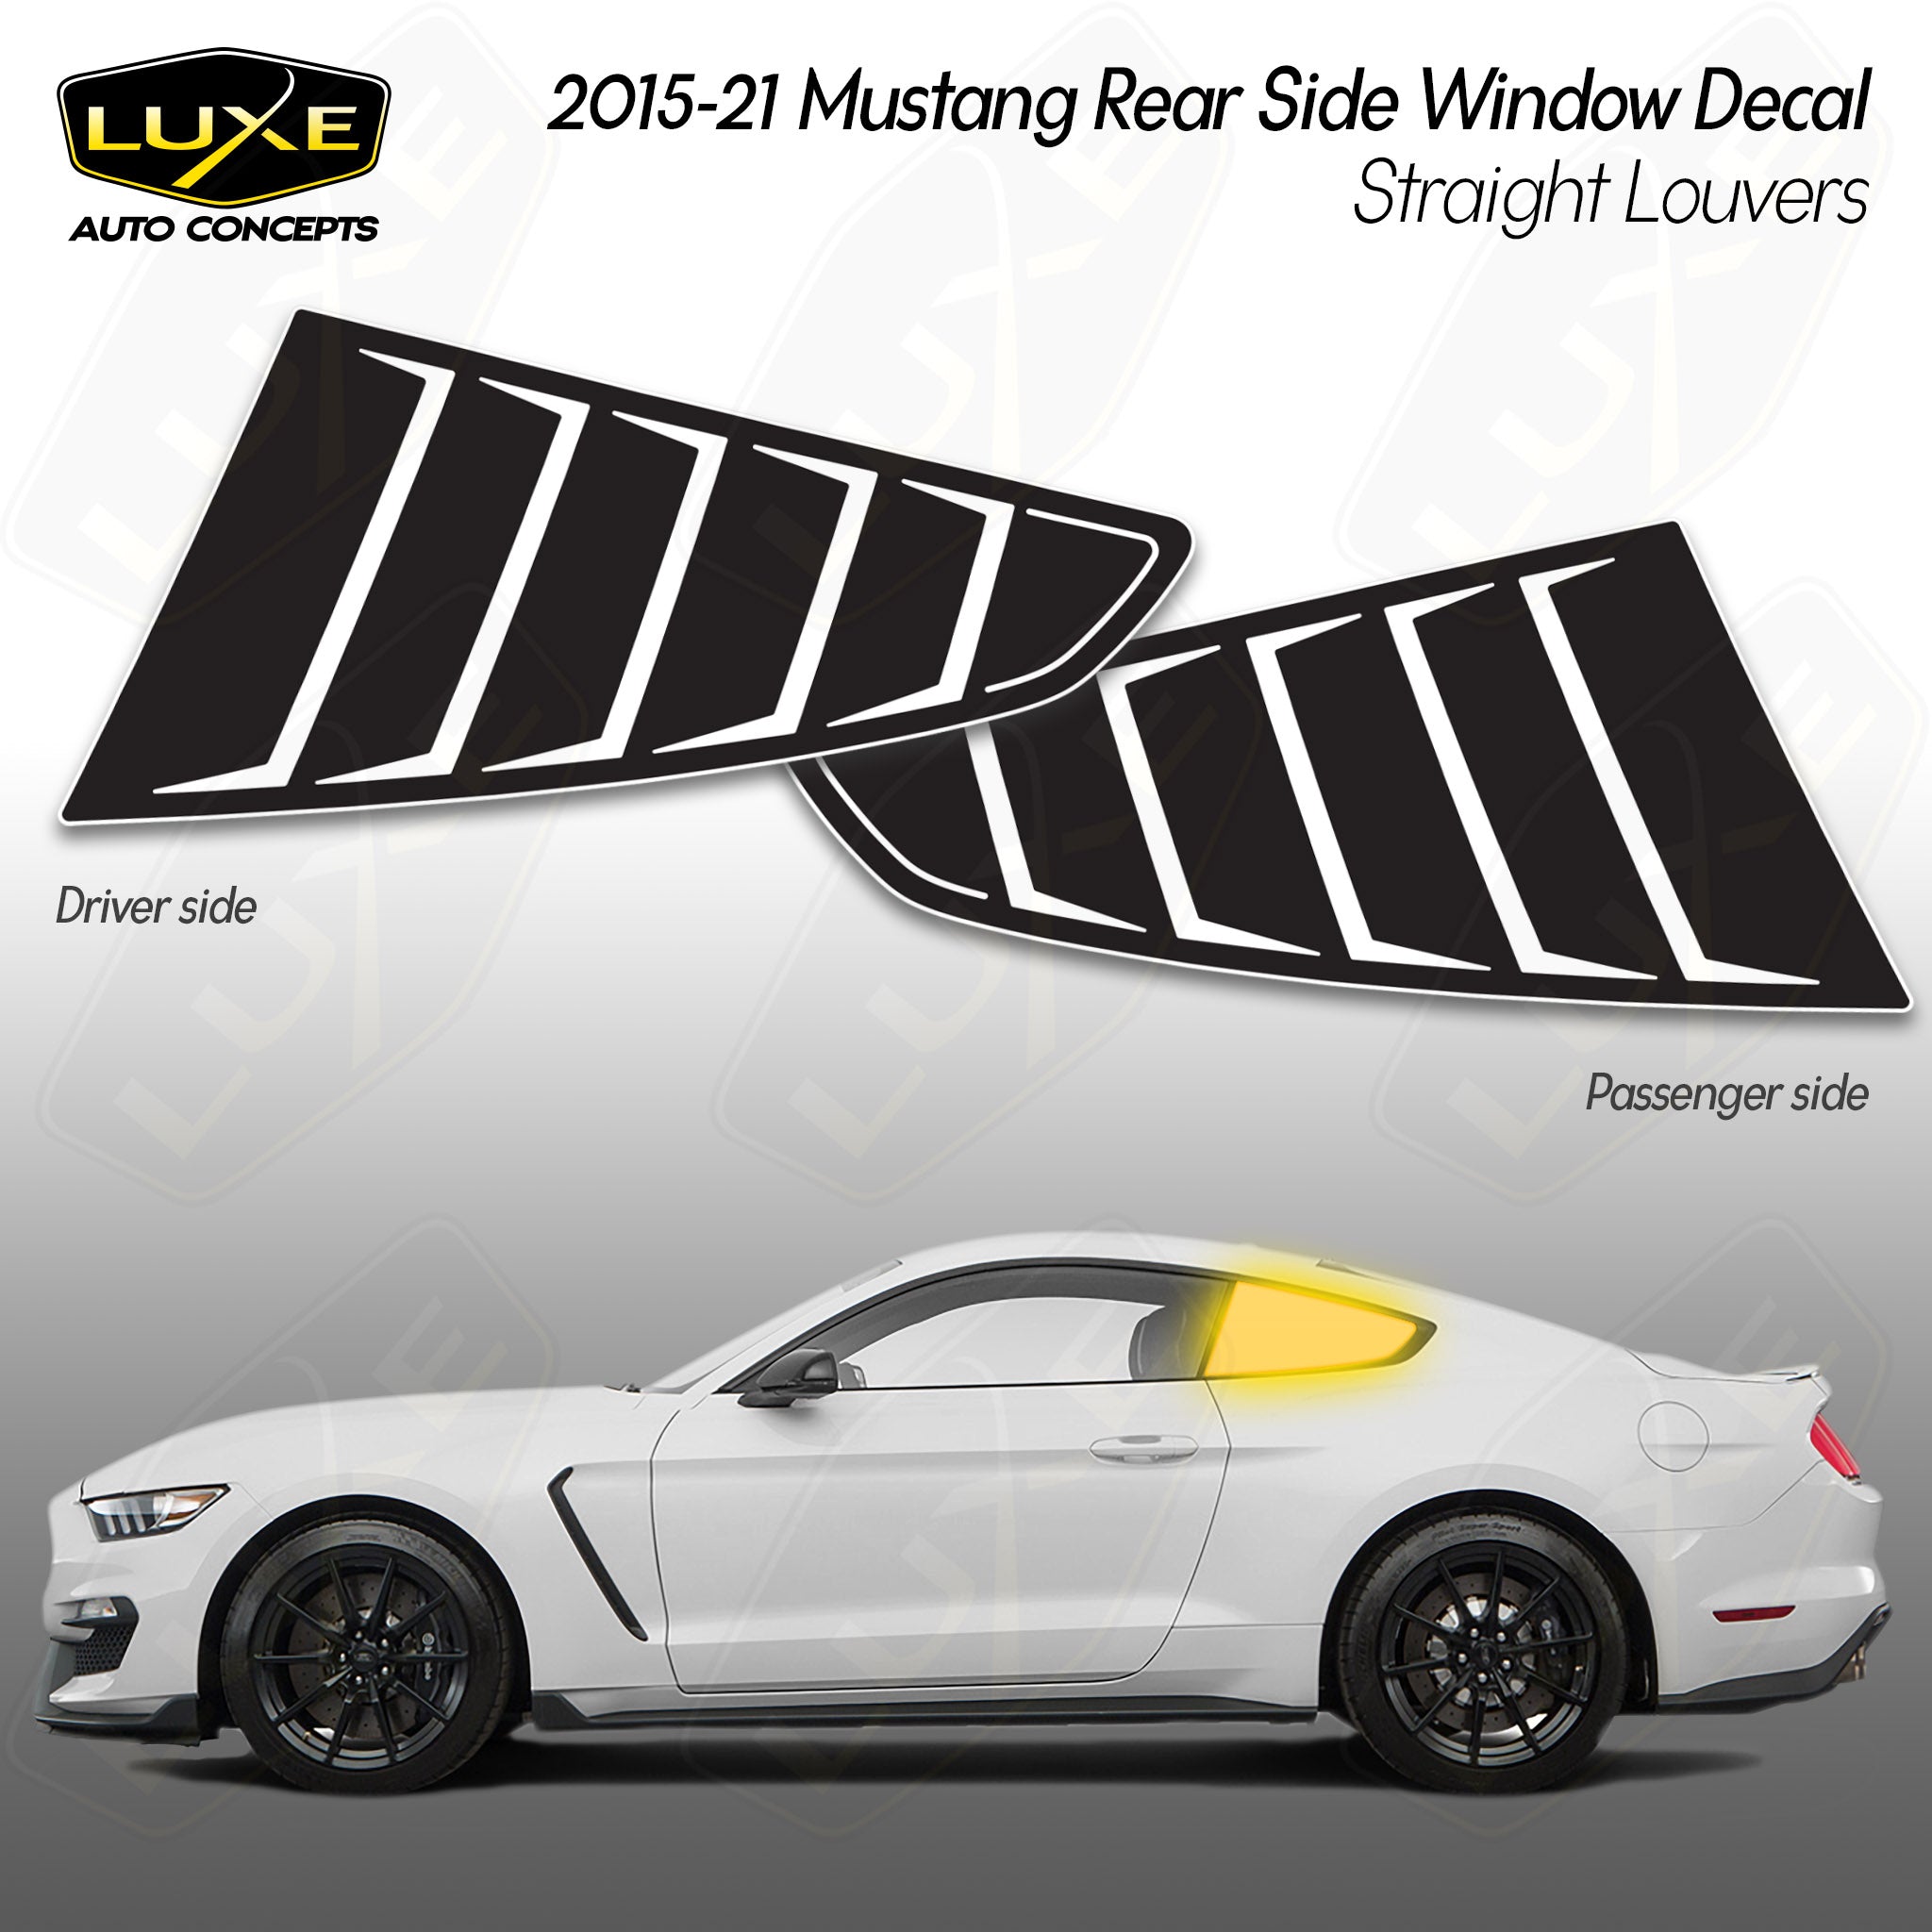 2015+ Mustang Rear Window Decal - Straight Louvers — Luxe Auto Concepts